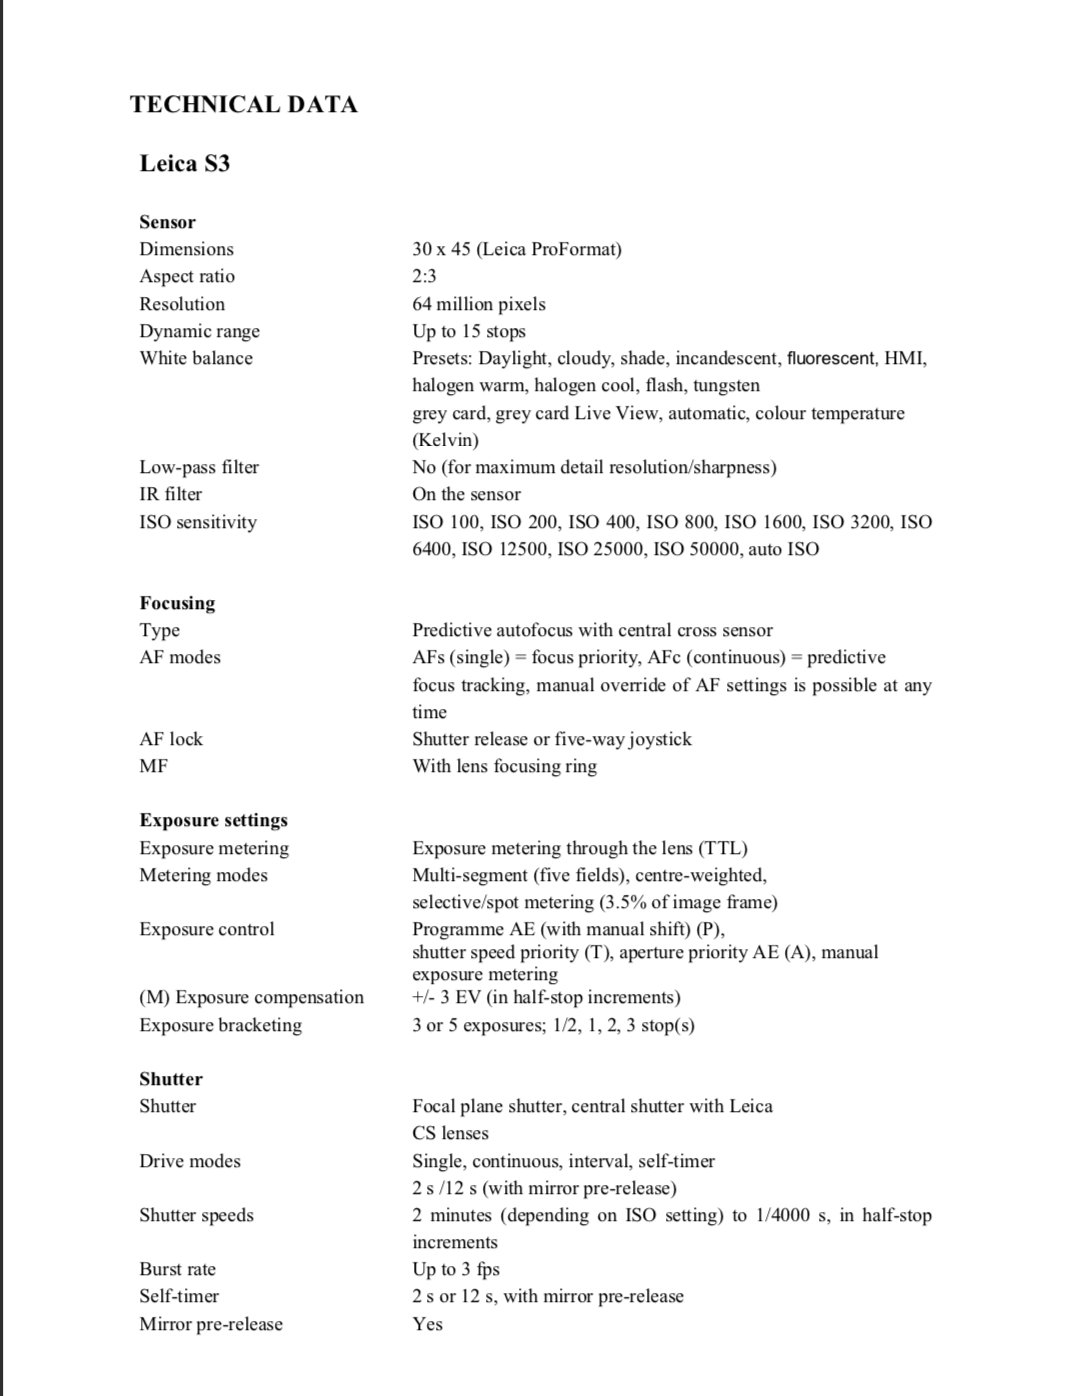 Leica-S3-medium-format-camera-technical-specifications1.png